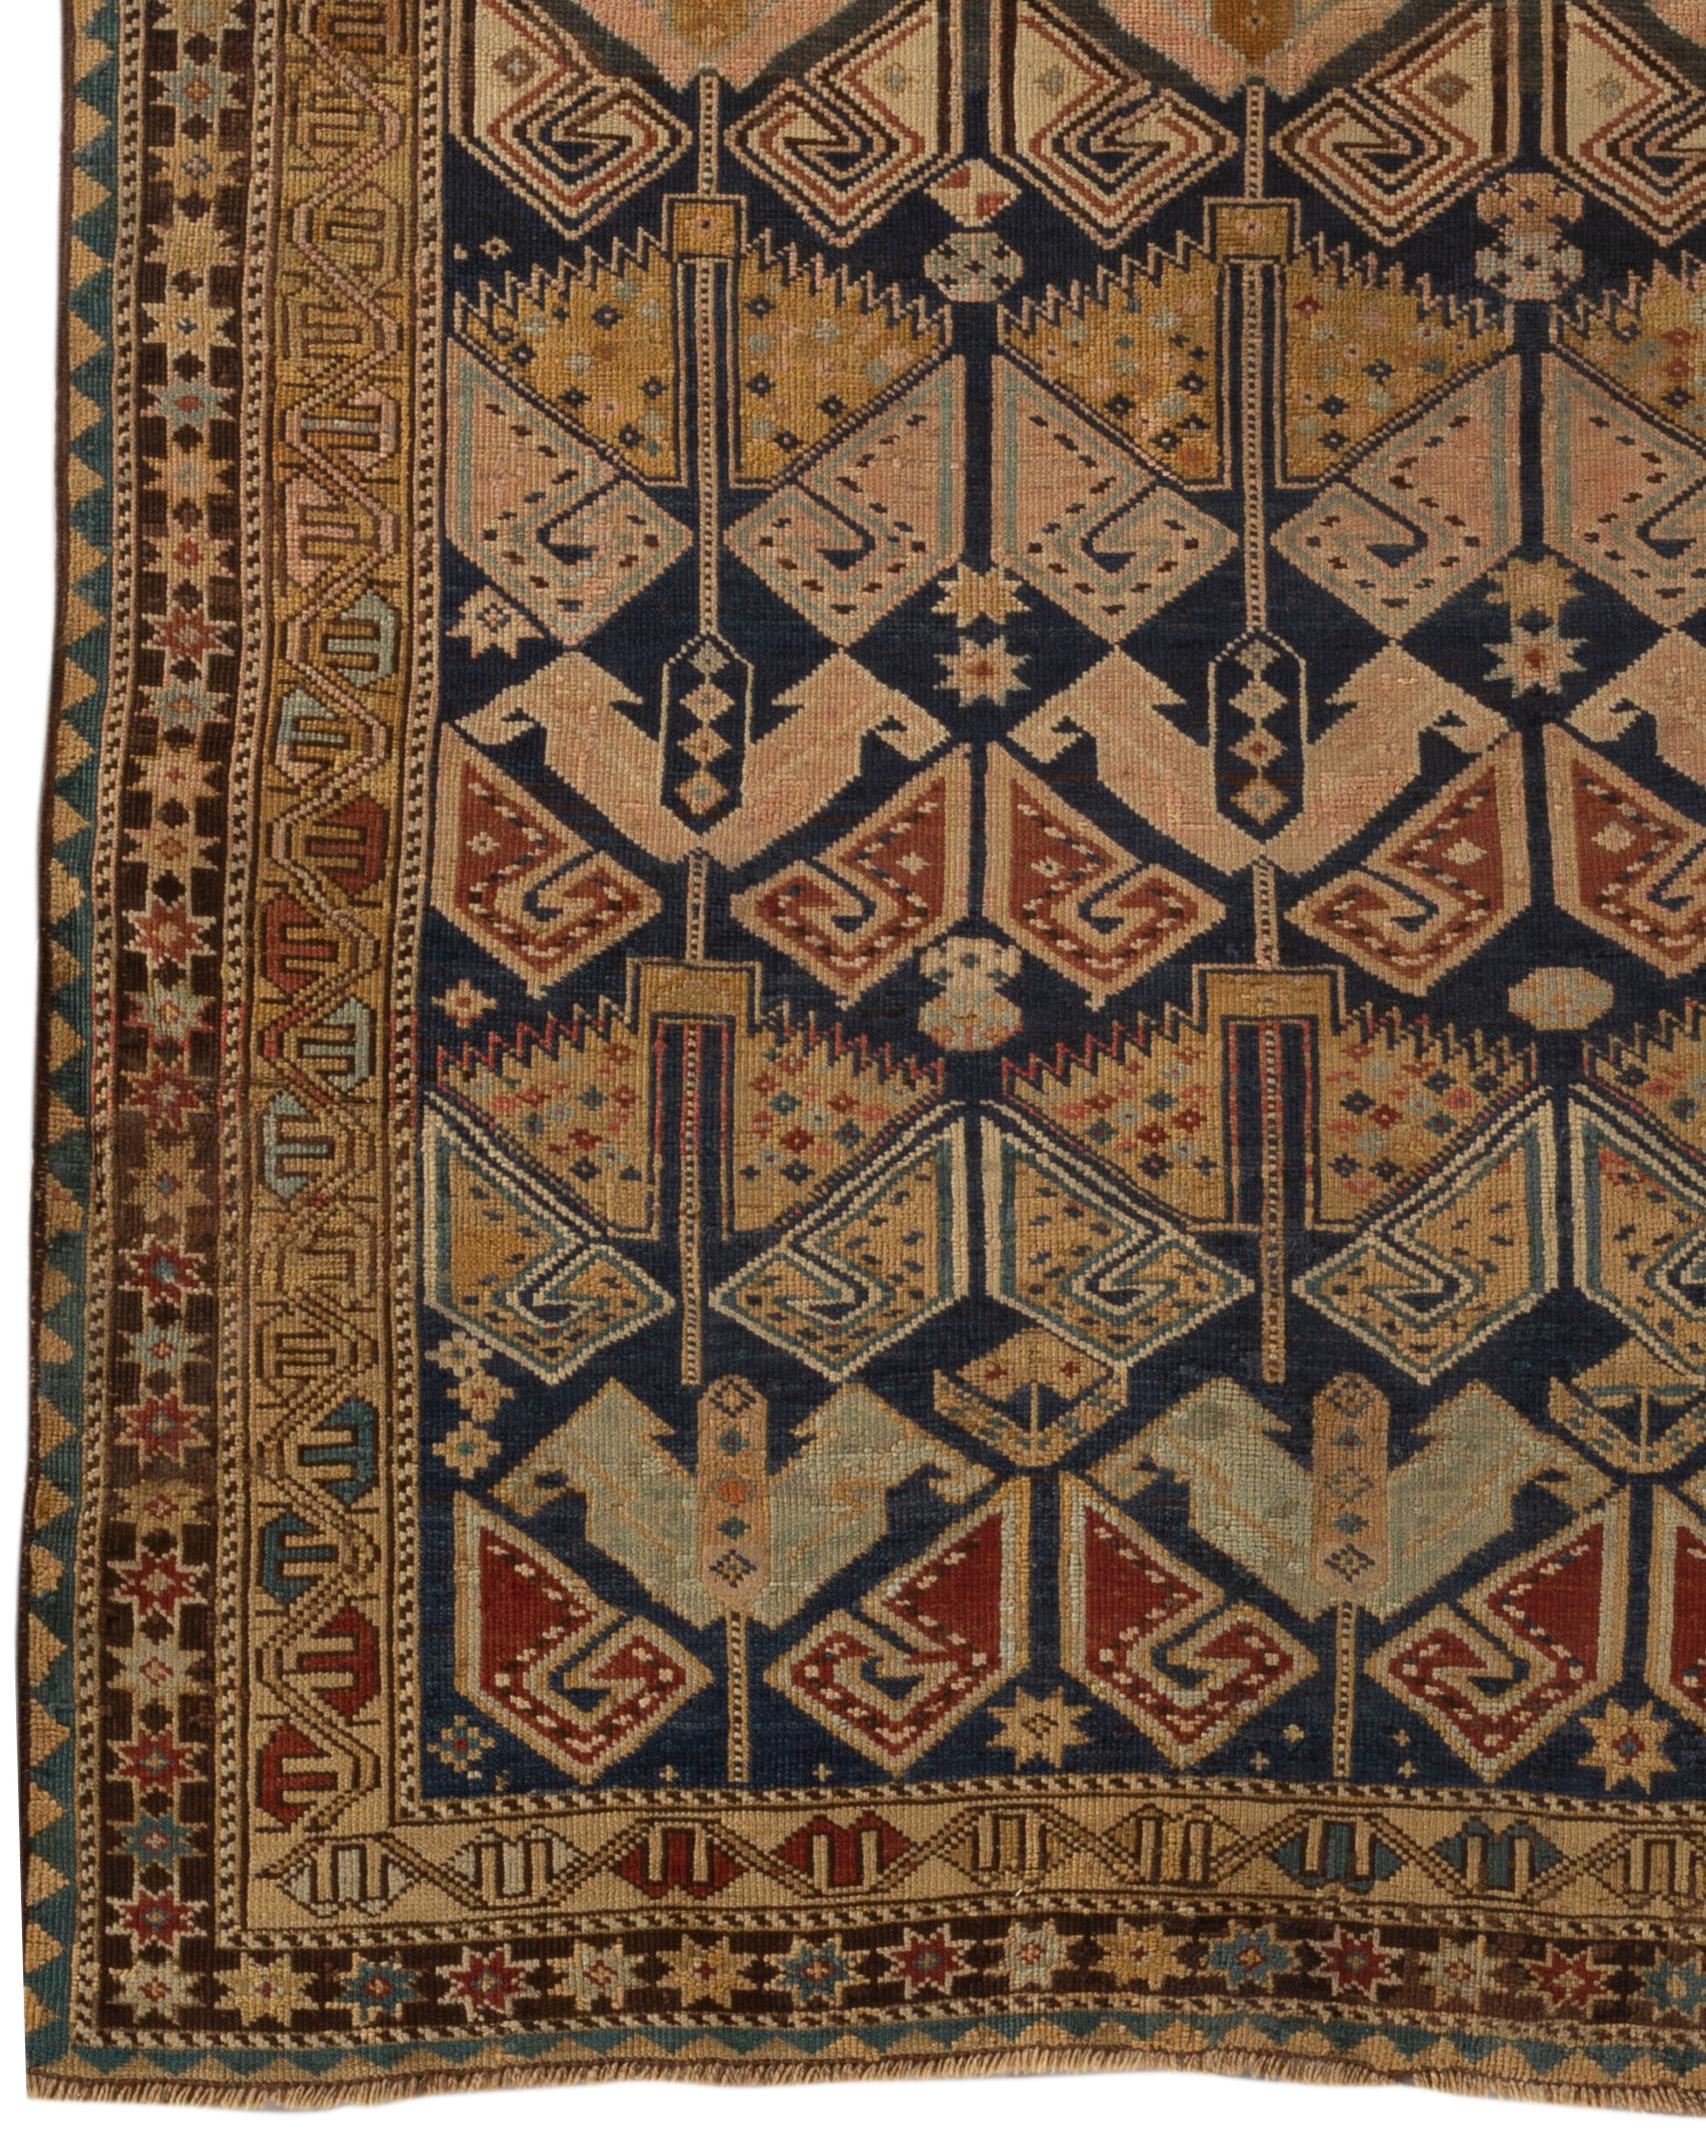 Antique Caucasian Shirvan rug, circa 1880. These types of antique Caucasian rugs were woven in the eastern part of the region, mostly along the west coast of the Caspian Sea and show in the design, the ethnic style associated with Caucasian pieces.